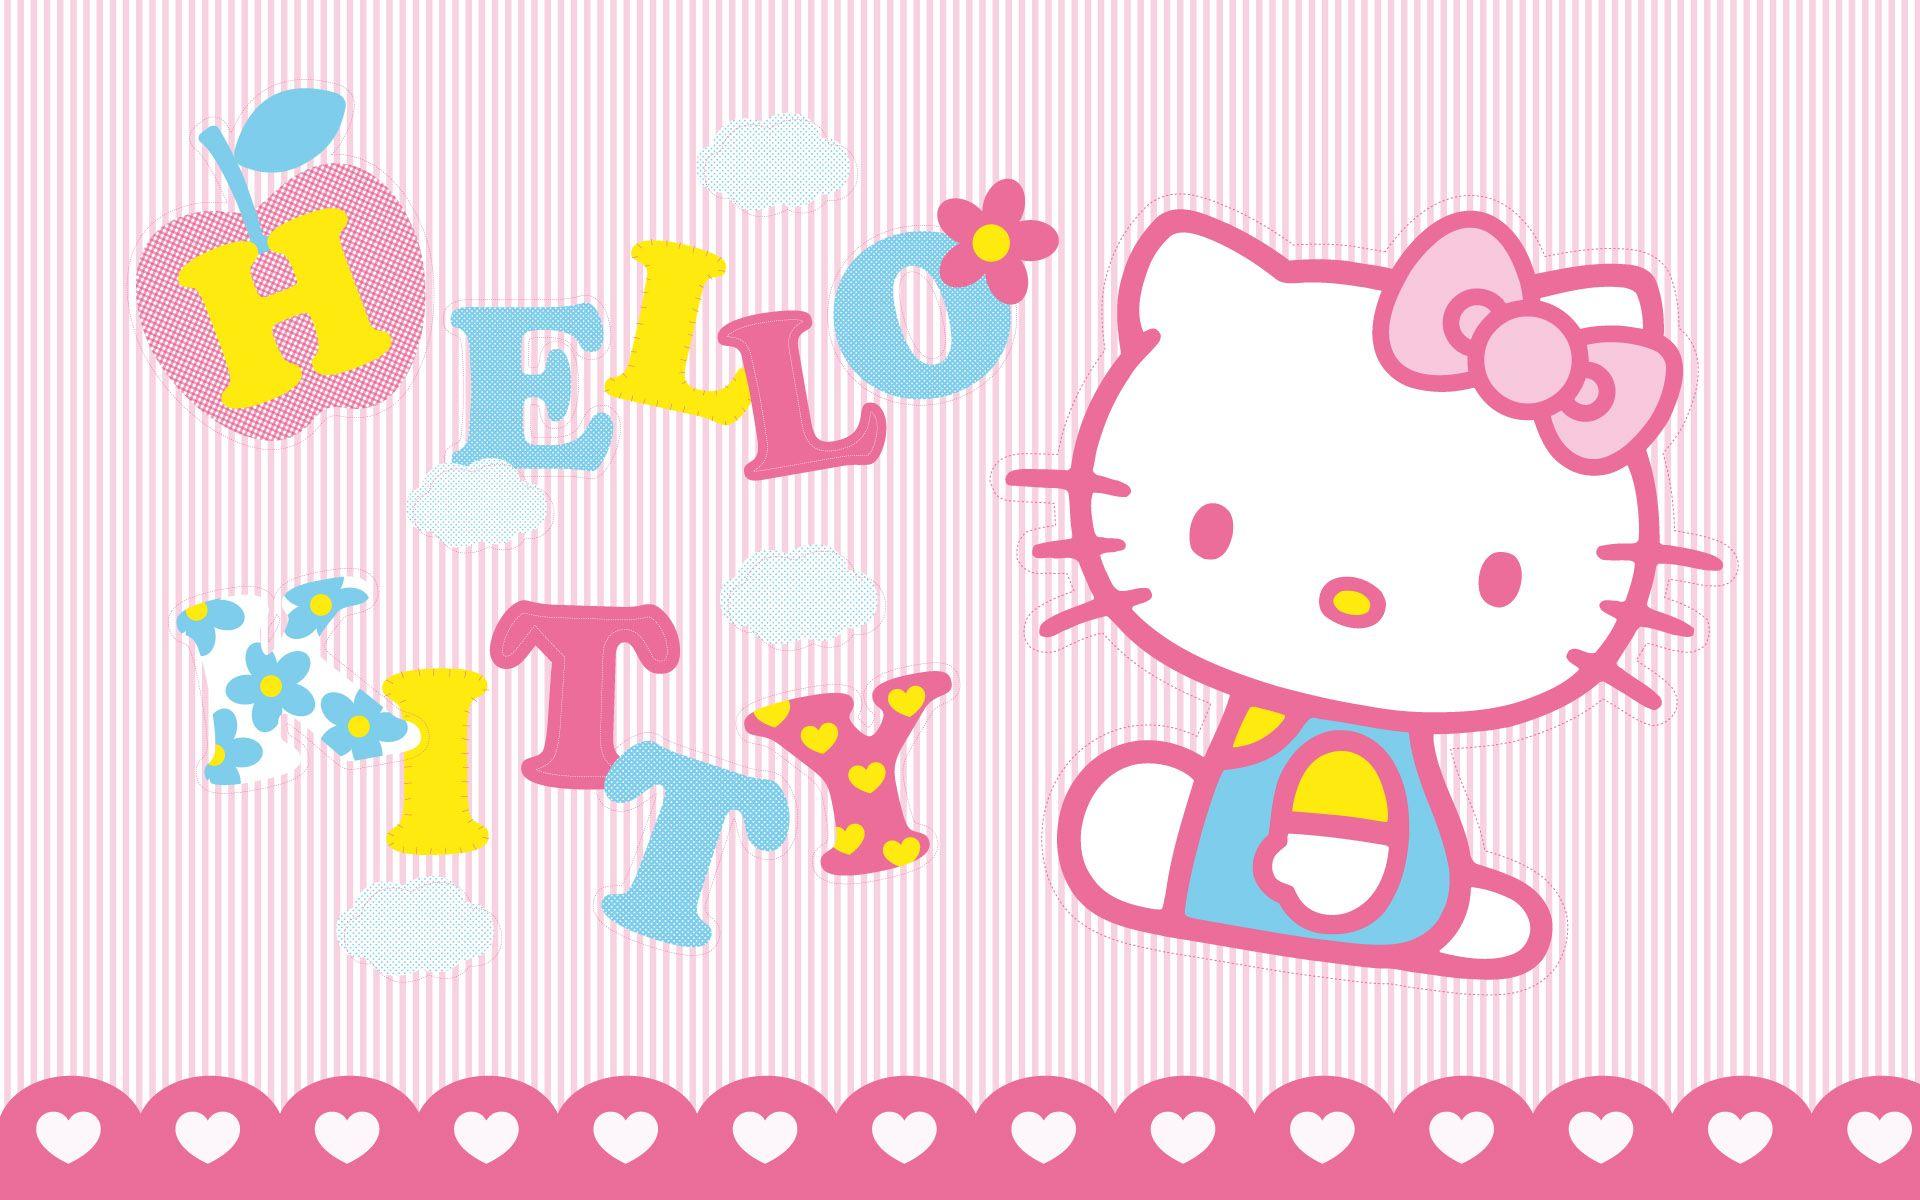 Hello Kitty Wallpapers - Top Free Hello Kitty Backgrounds - WallpaperAccess